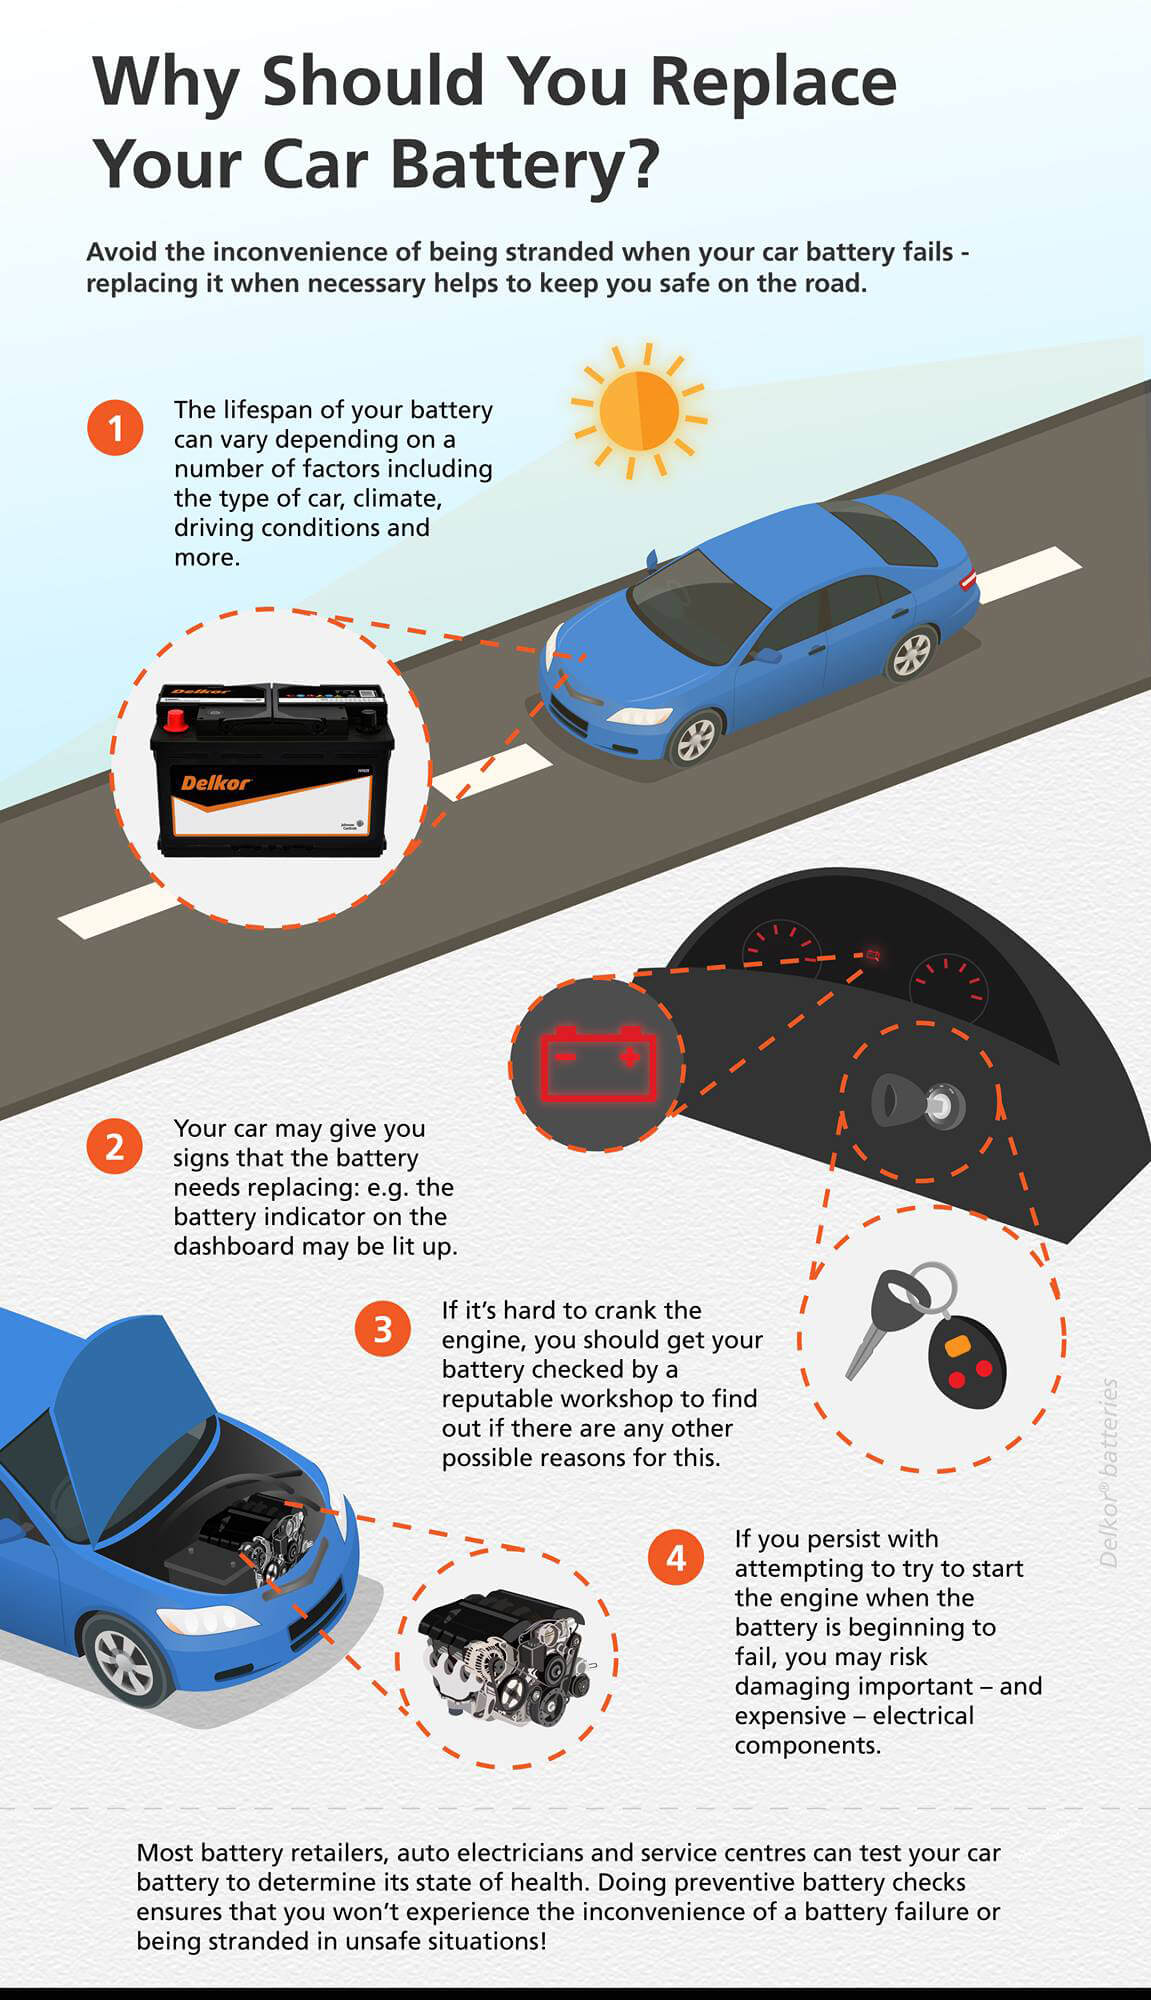 Why should you replace your car battery